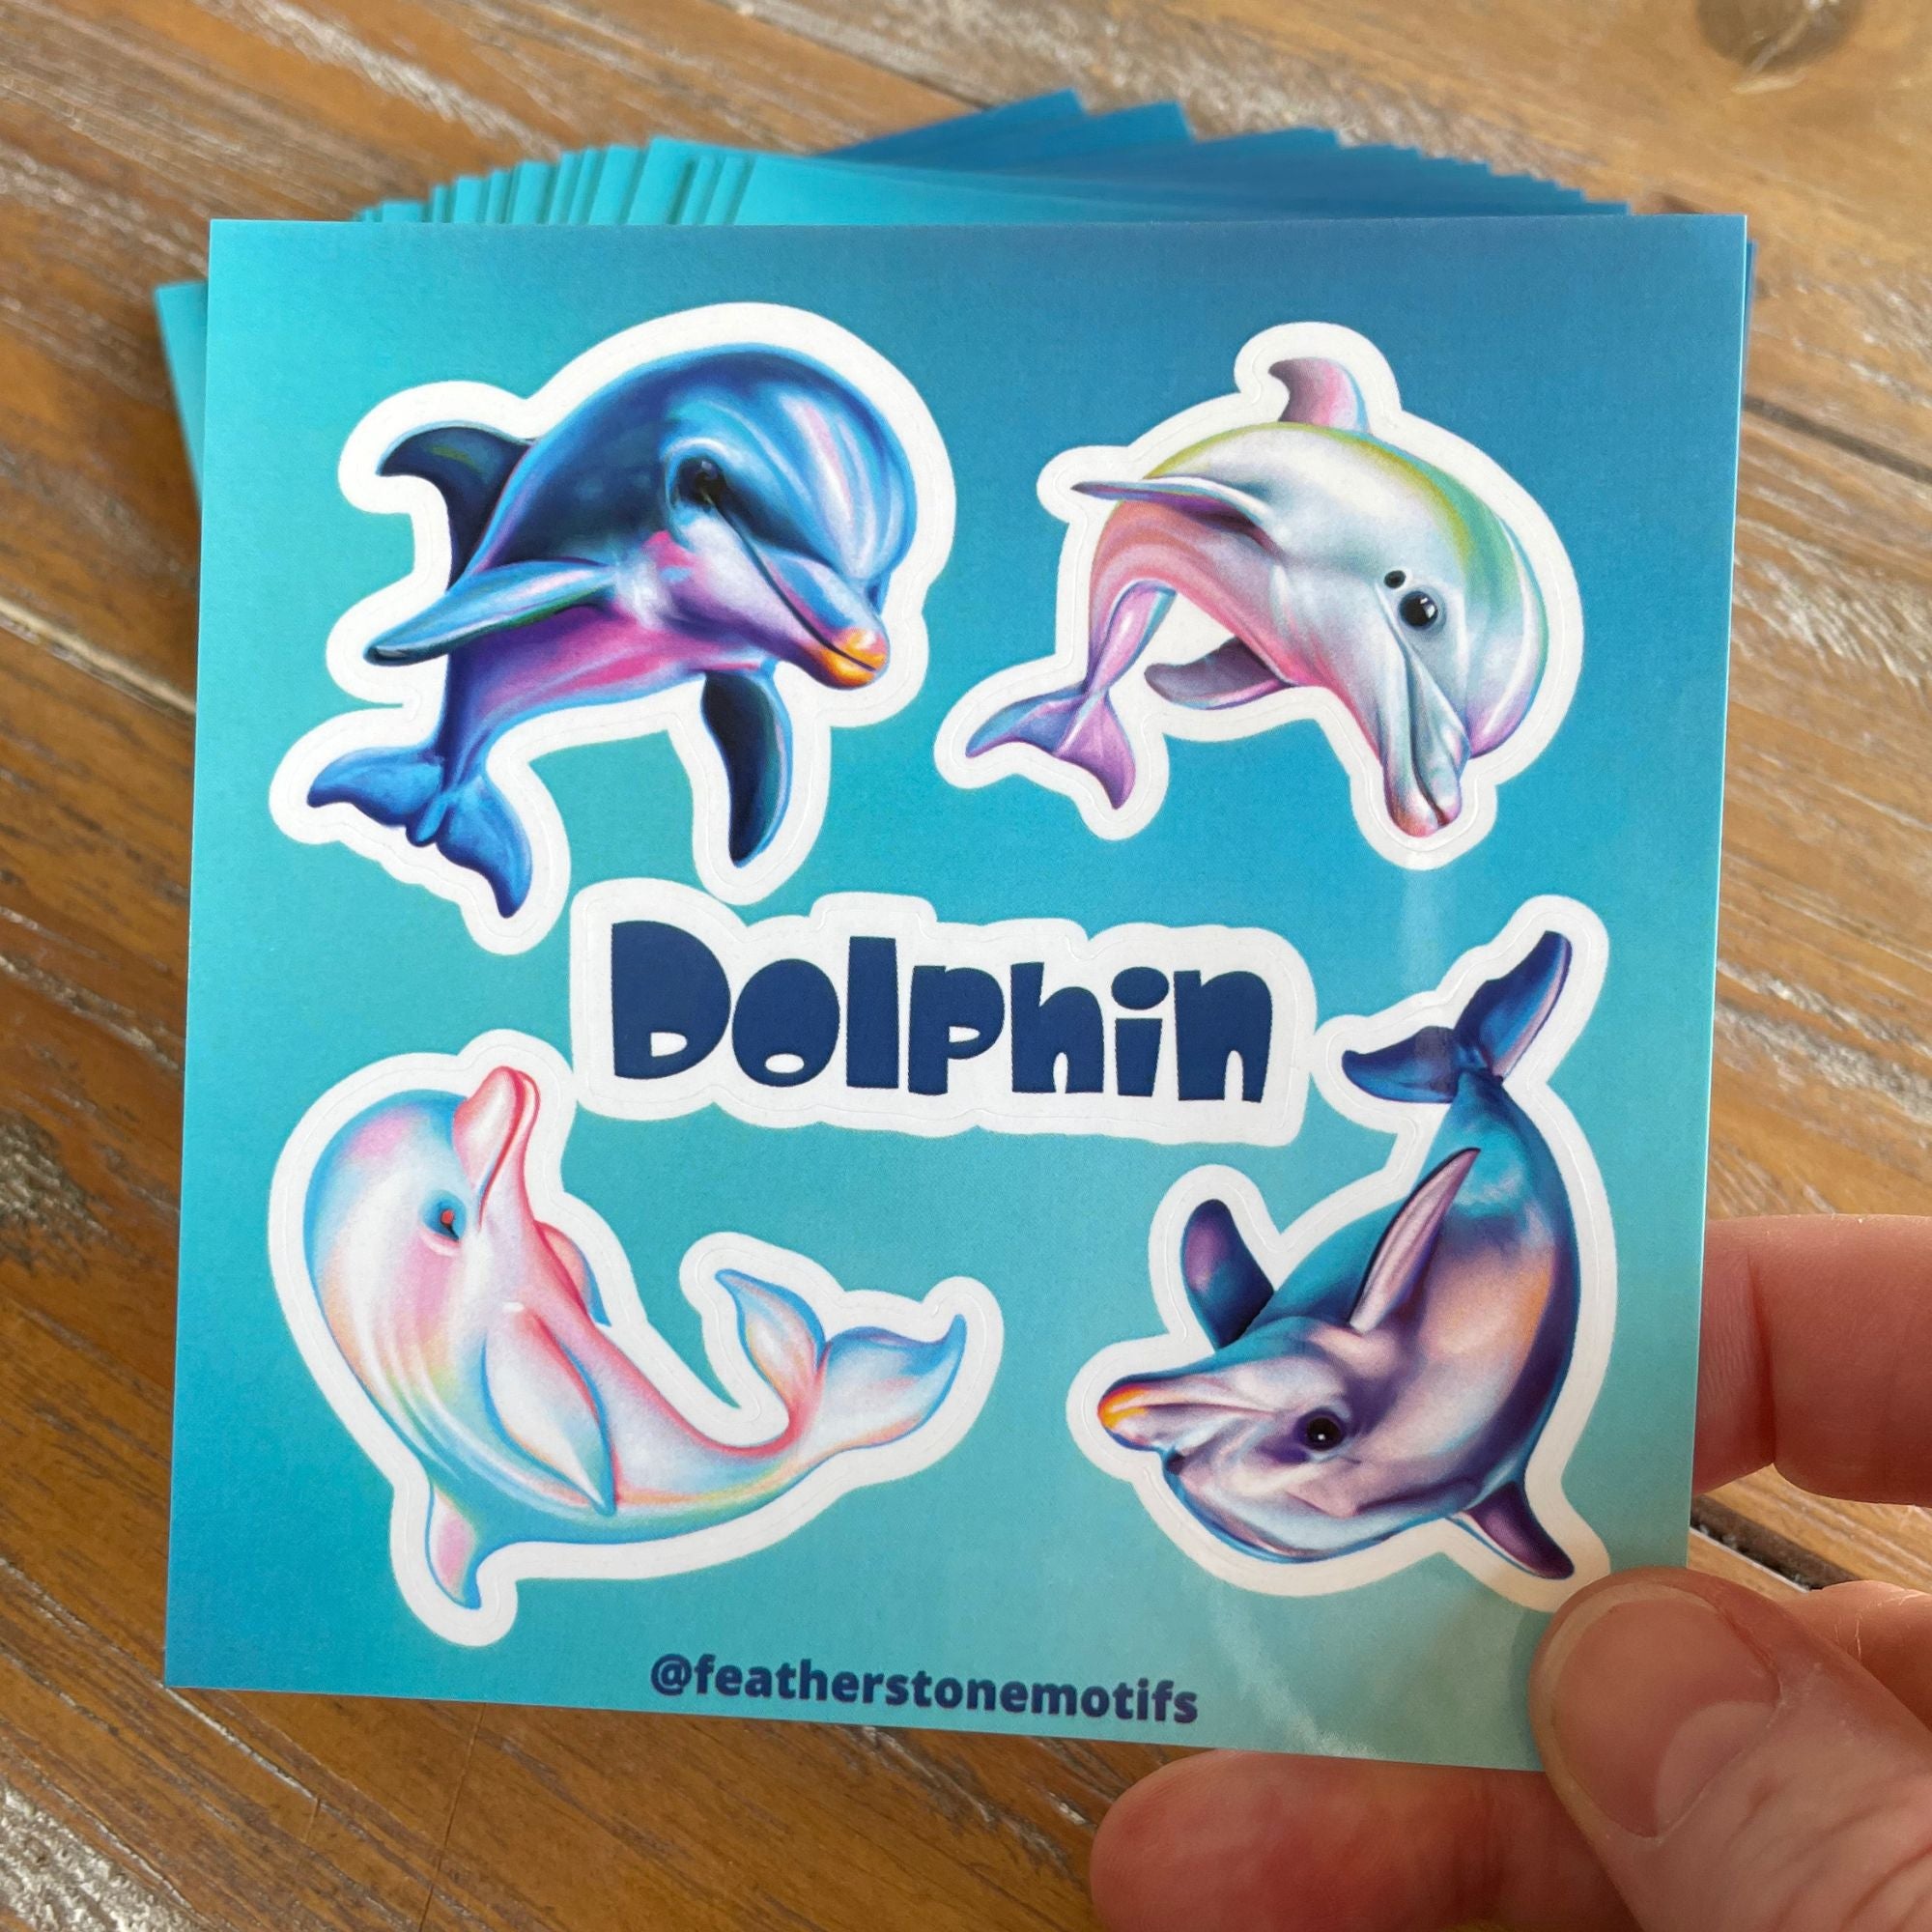 This image shows the Dolphin mini sheet